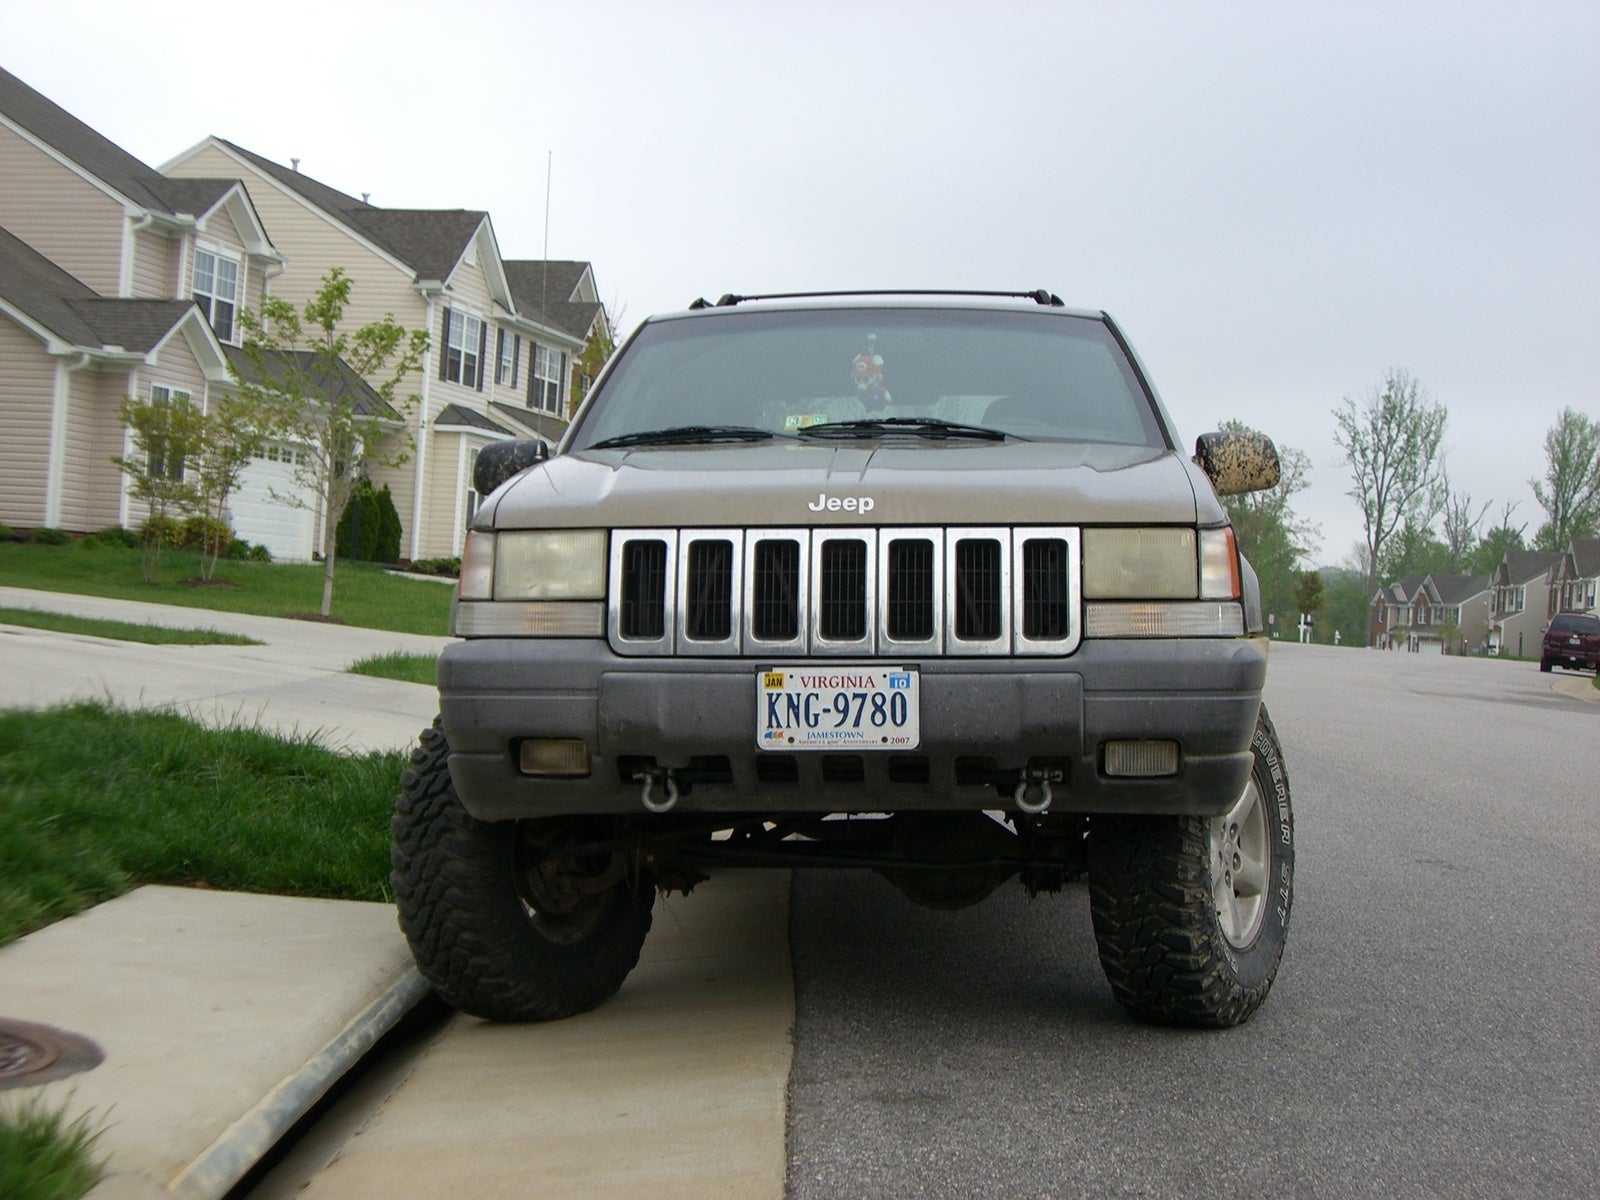 1998 Jeep Grand Cherokee Owners Manual Download Pdf.